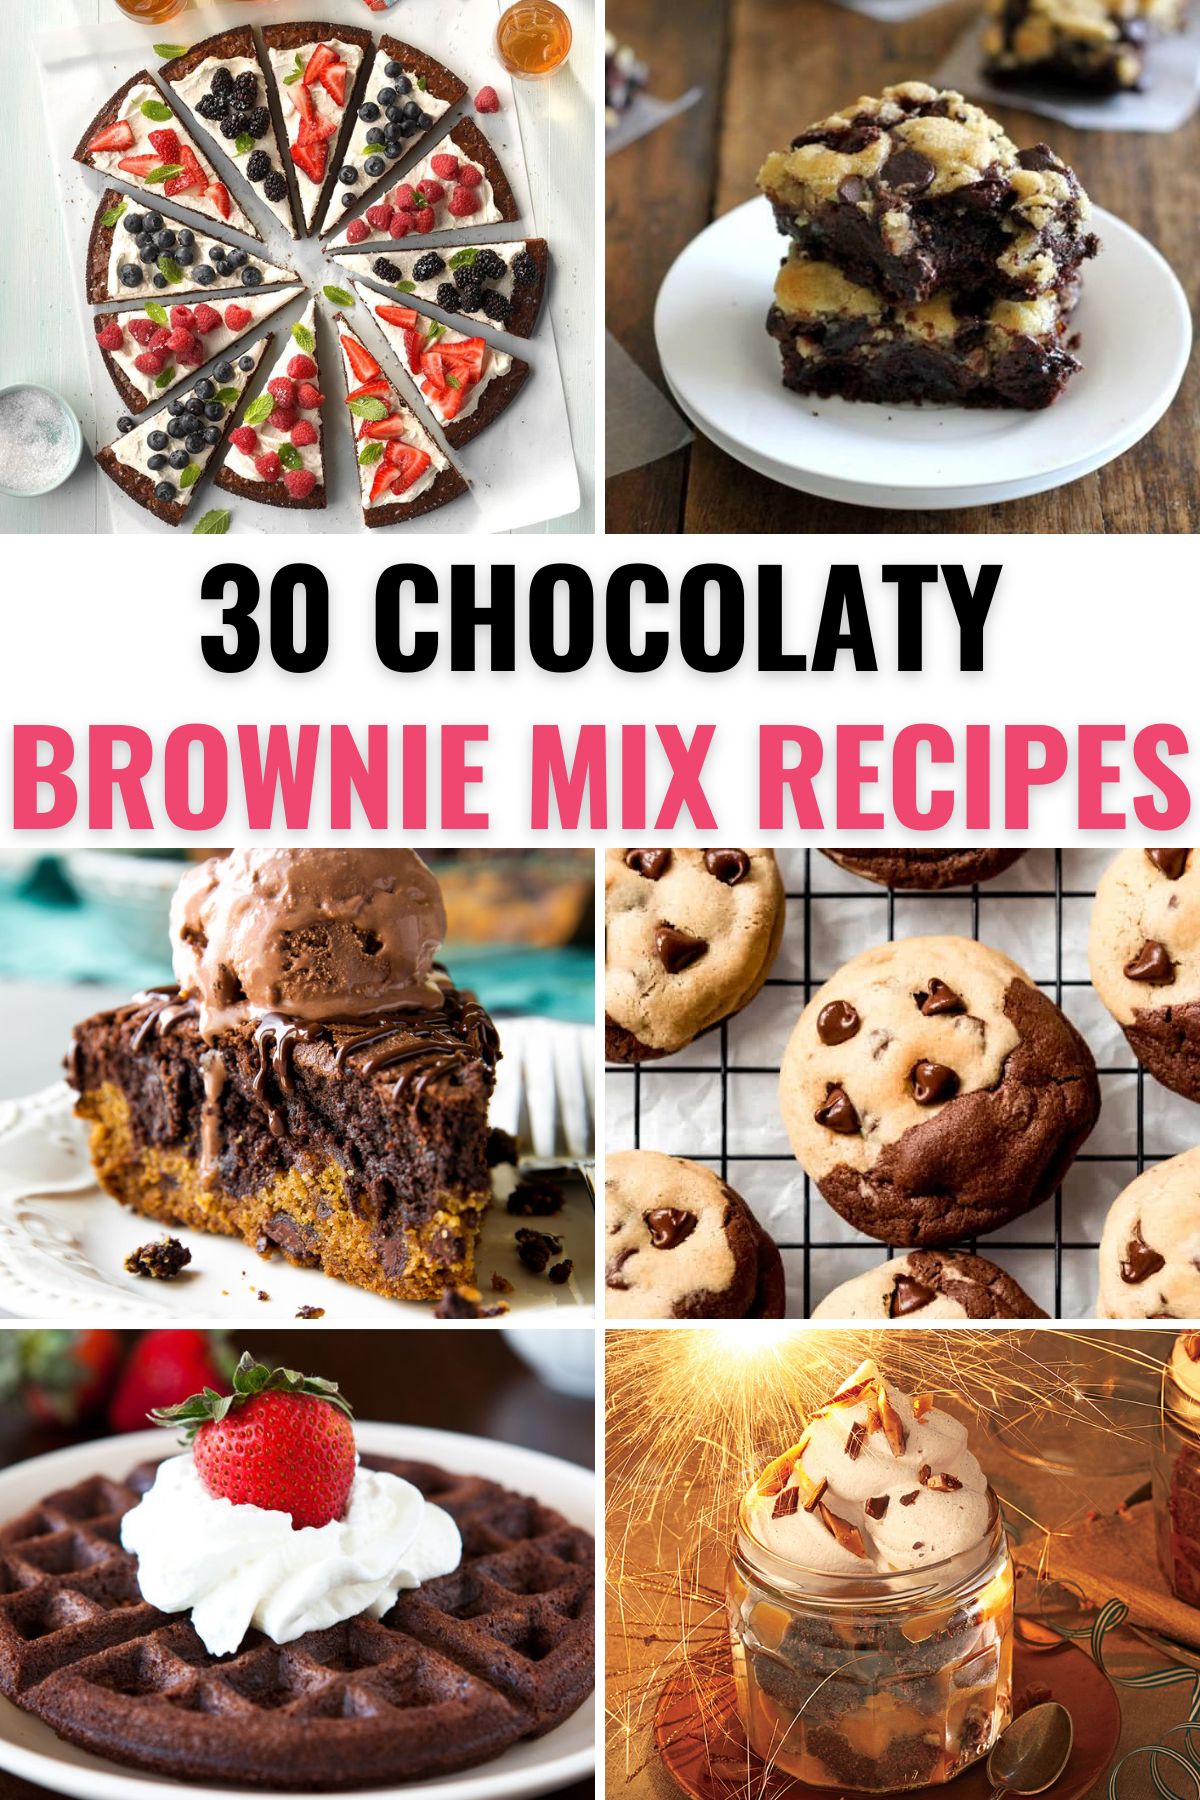 a collage of 6 images of treats made from box brownie mix recipes with title text reading 30 Chocolaty Brownie Mix Recipes